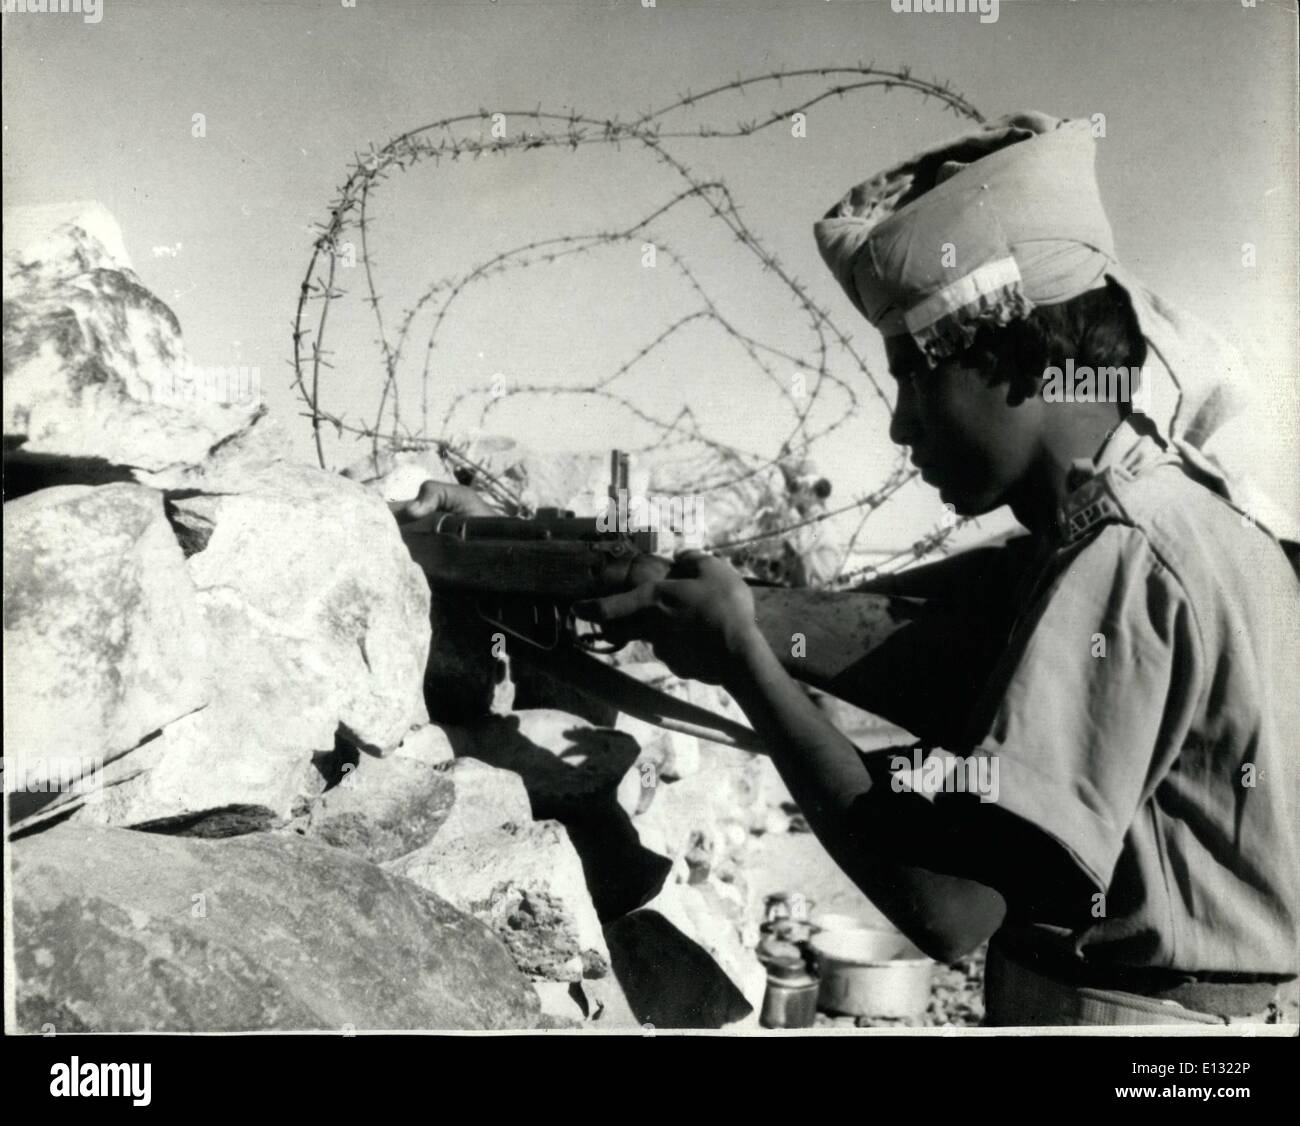 Feb. 26, 2012 - A member of the A.P.L. mans a stone sander wall on constant look-out towered the Yemen, for incursions by marauding triosmen Stock Photo